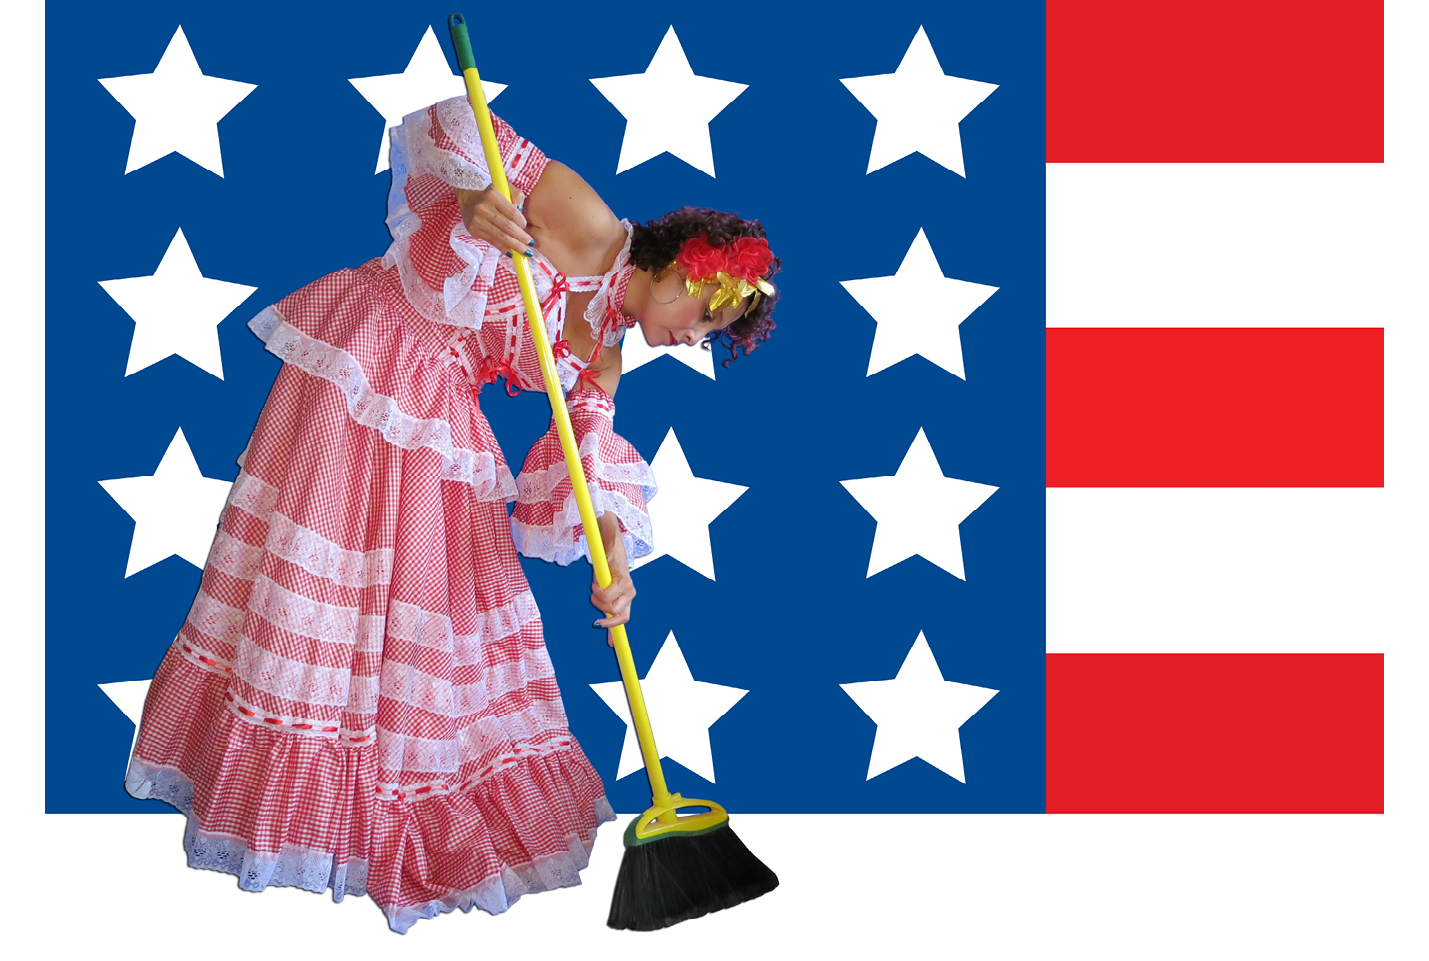 Promotional image for the performance piece Maid in the USA, displays a woman wearing a traditional Cumbia dress while sweeping in front of the US flag.